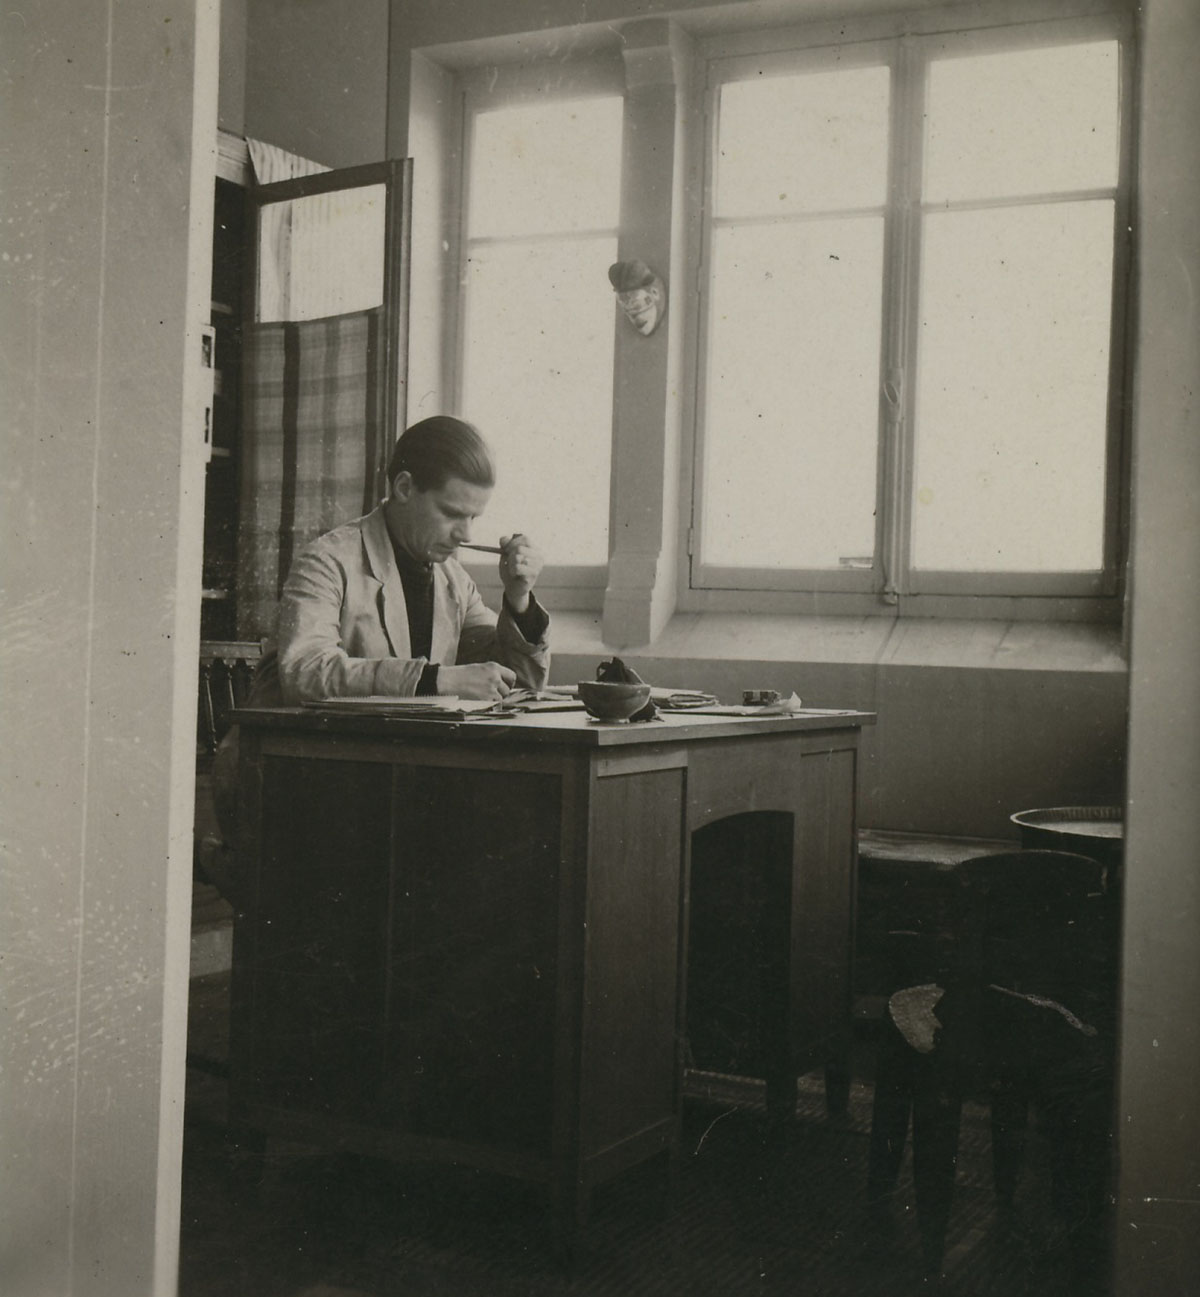 André Leroi-Gourhan at his desk in his office at the faculty of letters of the University of Lyon, 1951.